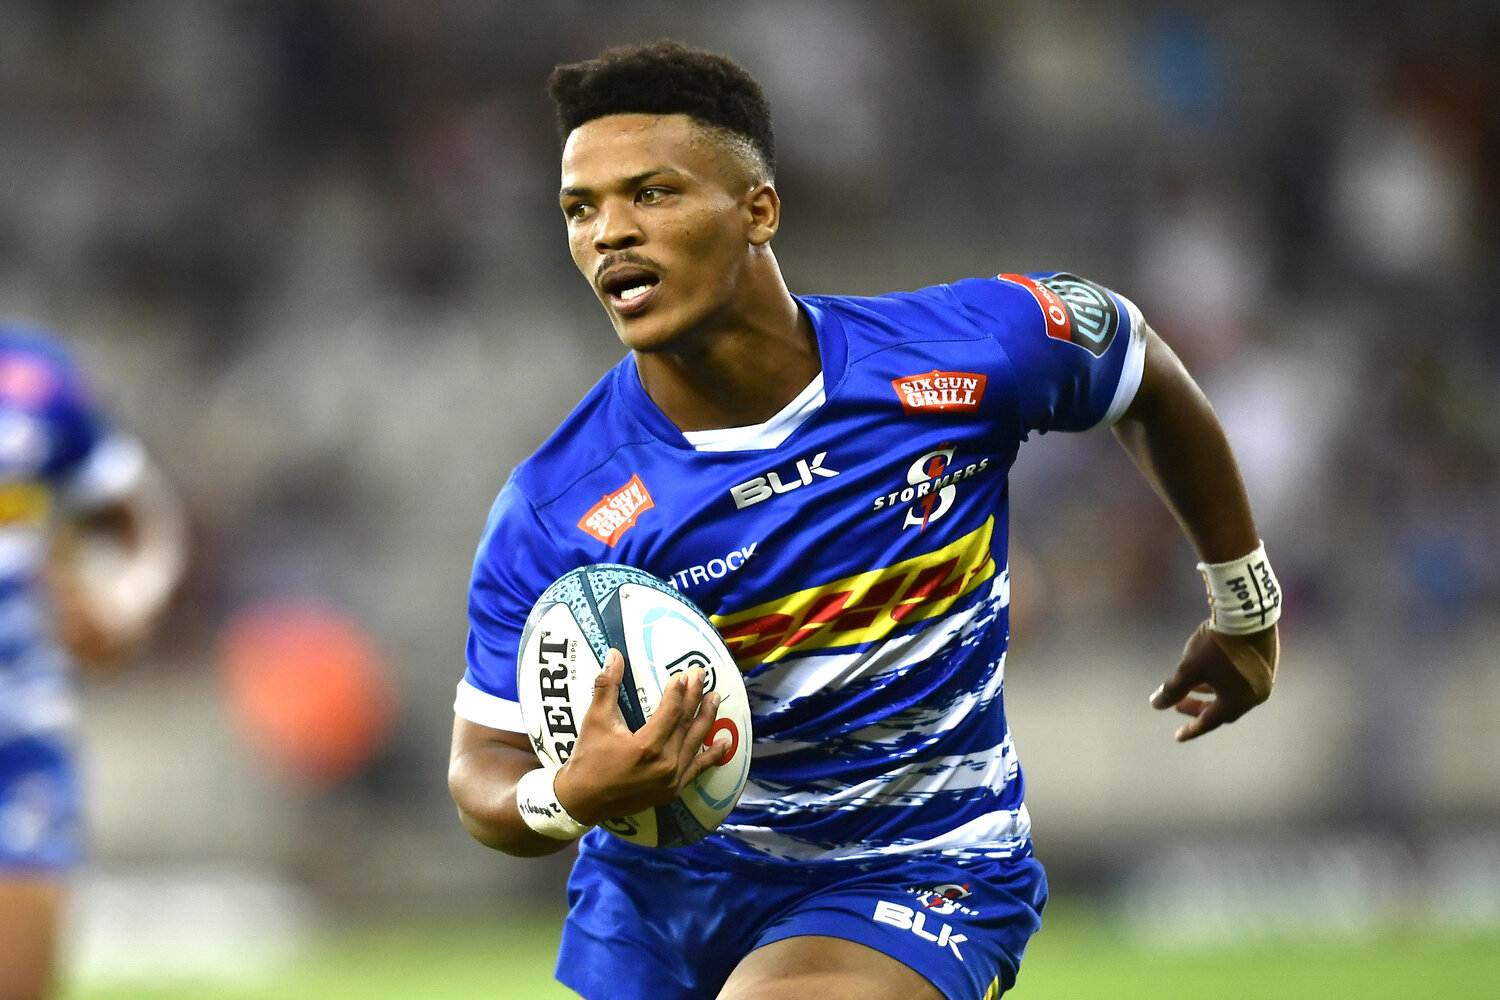 Stormers change six in starting XV for URC visit by Sharks